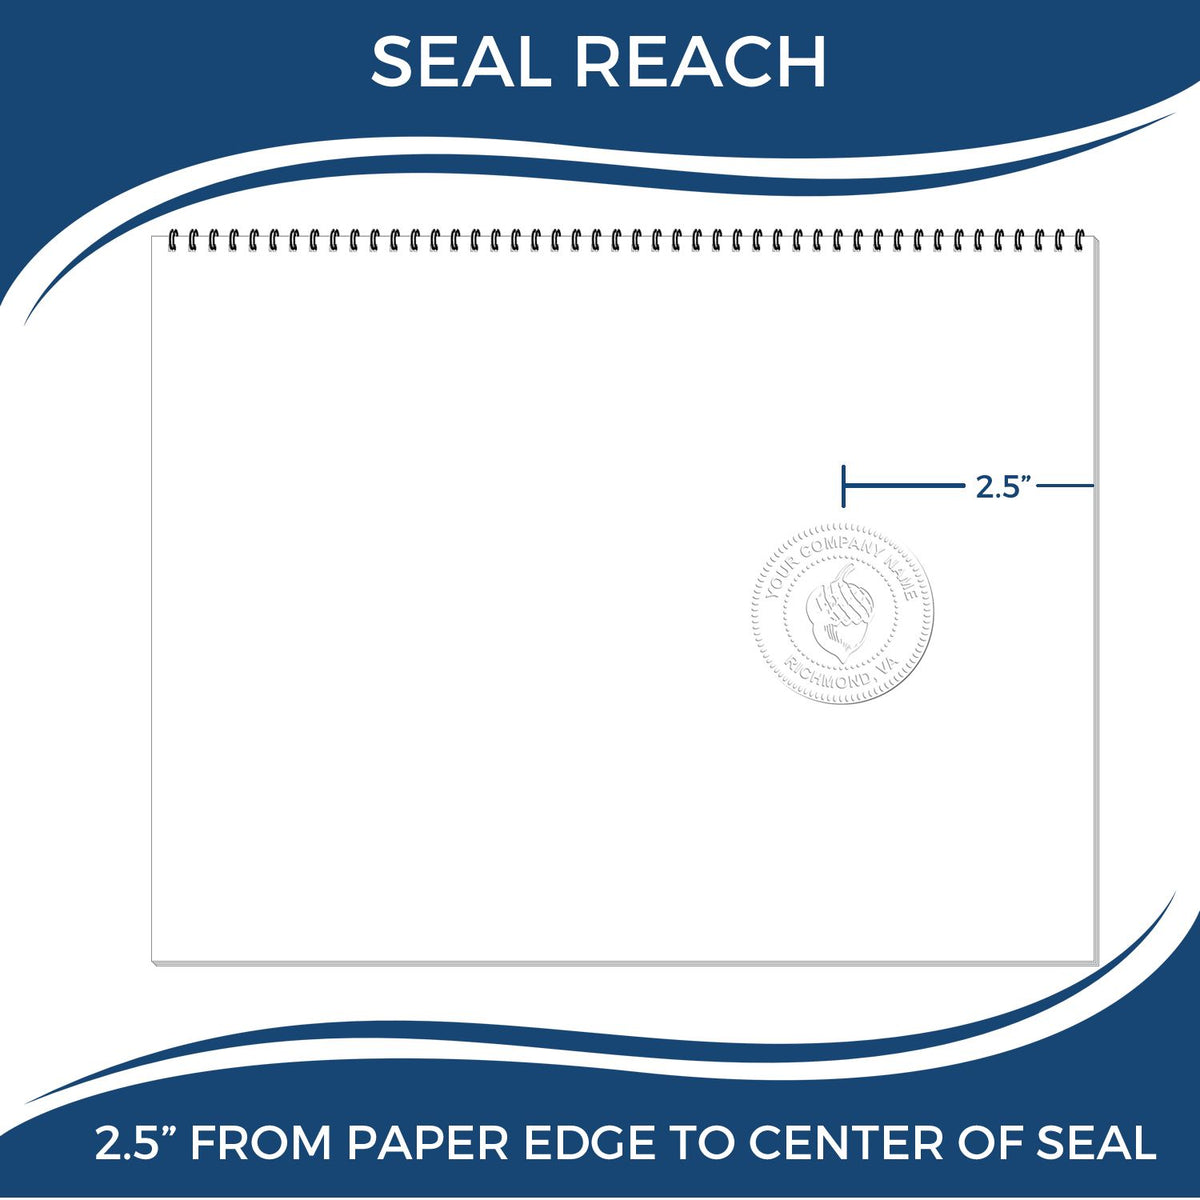 An infographic showing the seal reach which is represented by a ruler and a miniature seal image of the Heavy Duty Cast Iron Alaska Engineer Seal Embosser